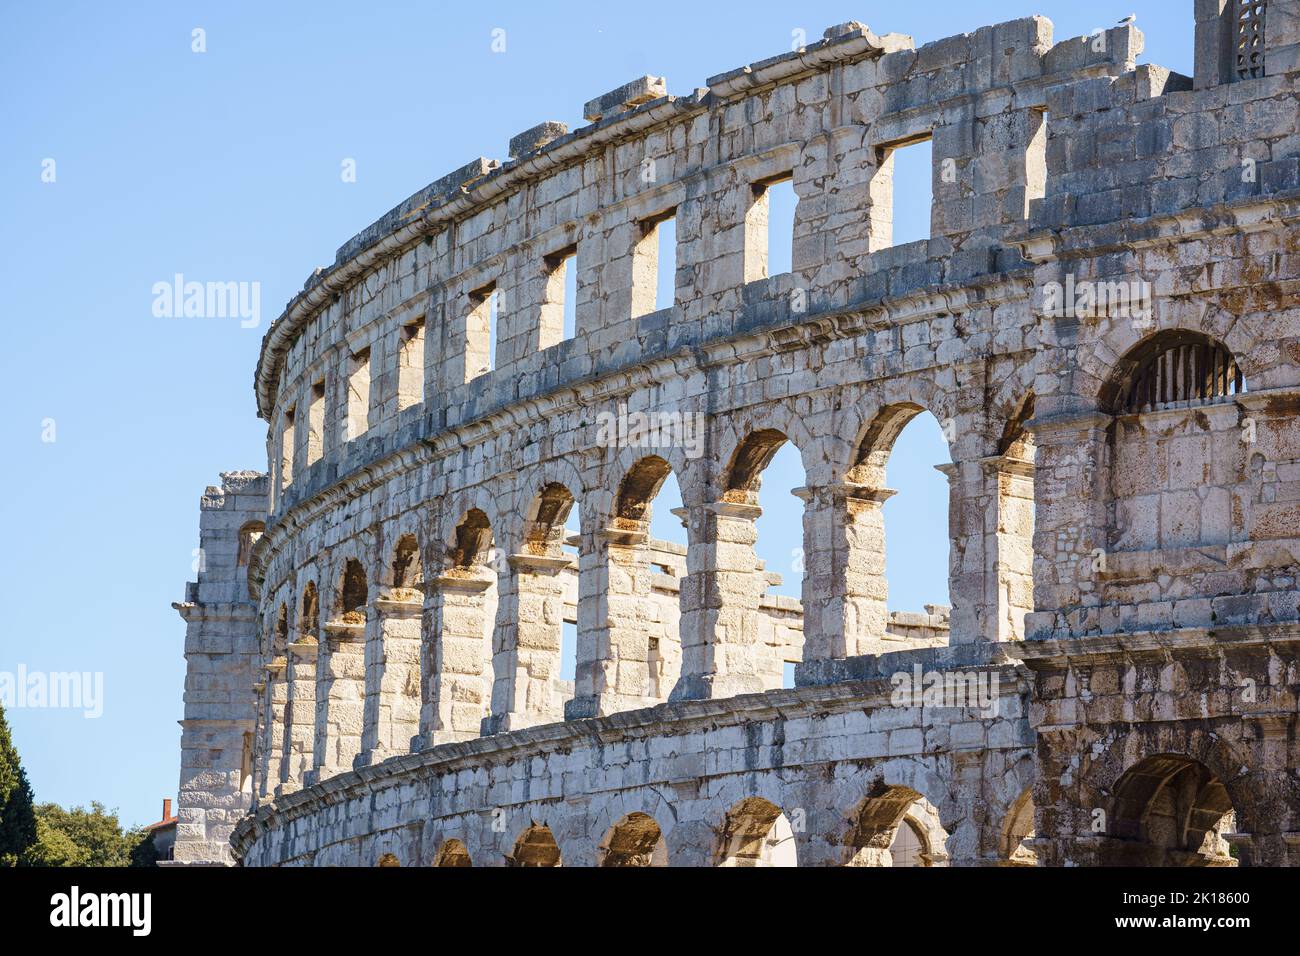 Pula, Croatia - September 2022 September 13: Pula is the city in Istria region, Croatia and is known for Pula Arena Stock Photo